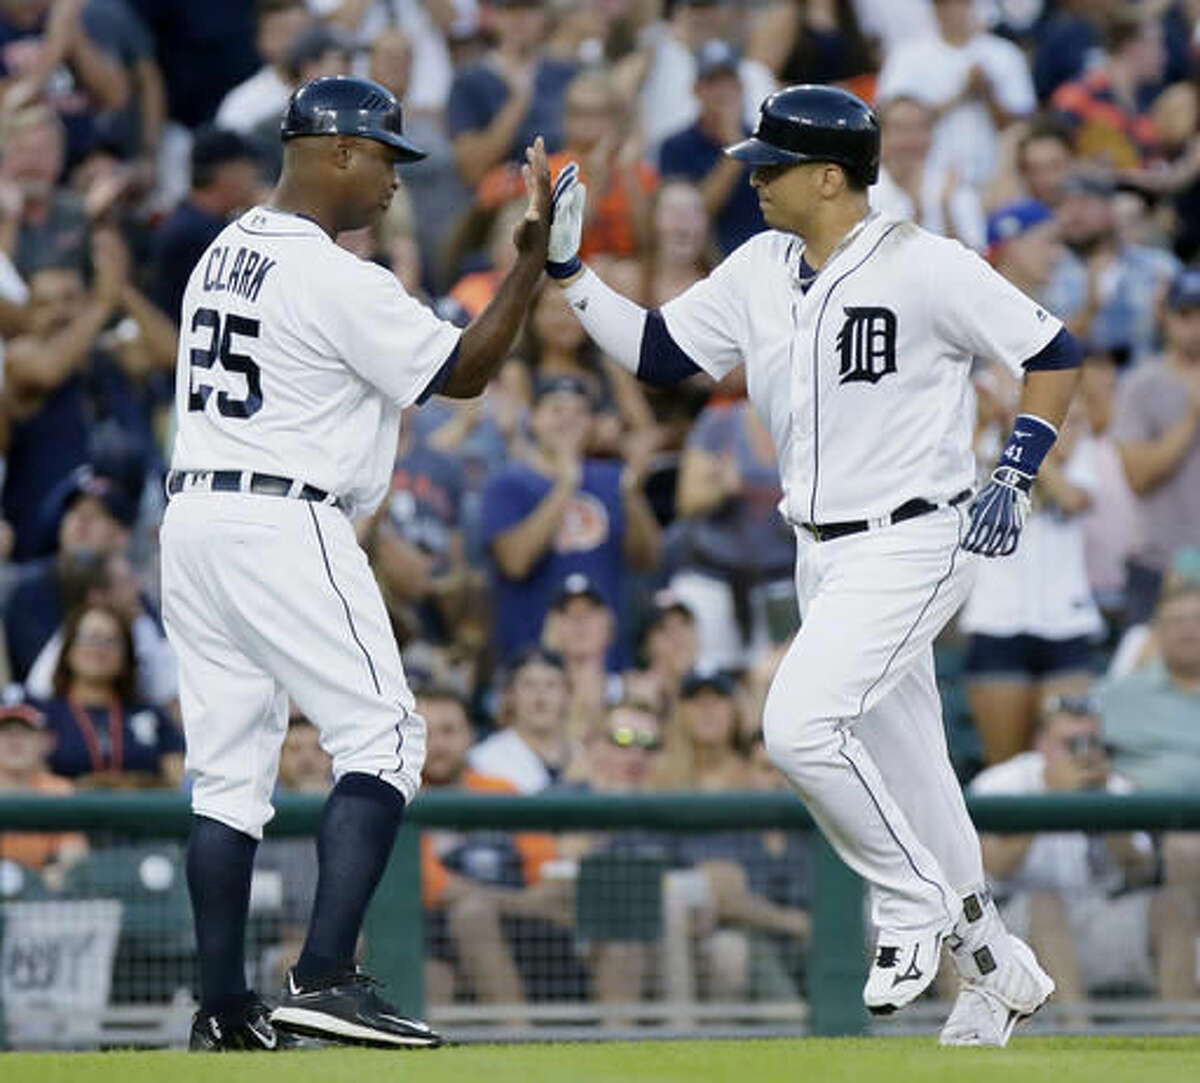 Detroit Tigers' Victor Martinez receives a high-five from third base coach Dave Clark (25) after hitting a two-run home run against the New York Mets during the fourth inning of an interleague baseball game Friday, Aug. 5, 2016, in Detroit. (AP Photo/Duane Burleson)